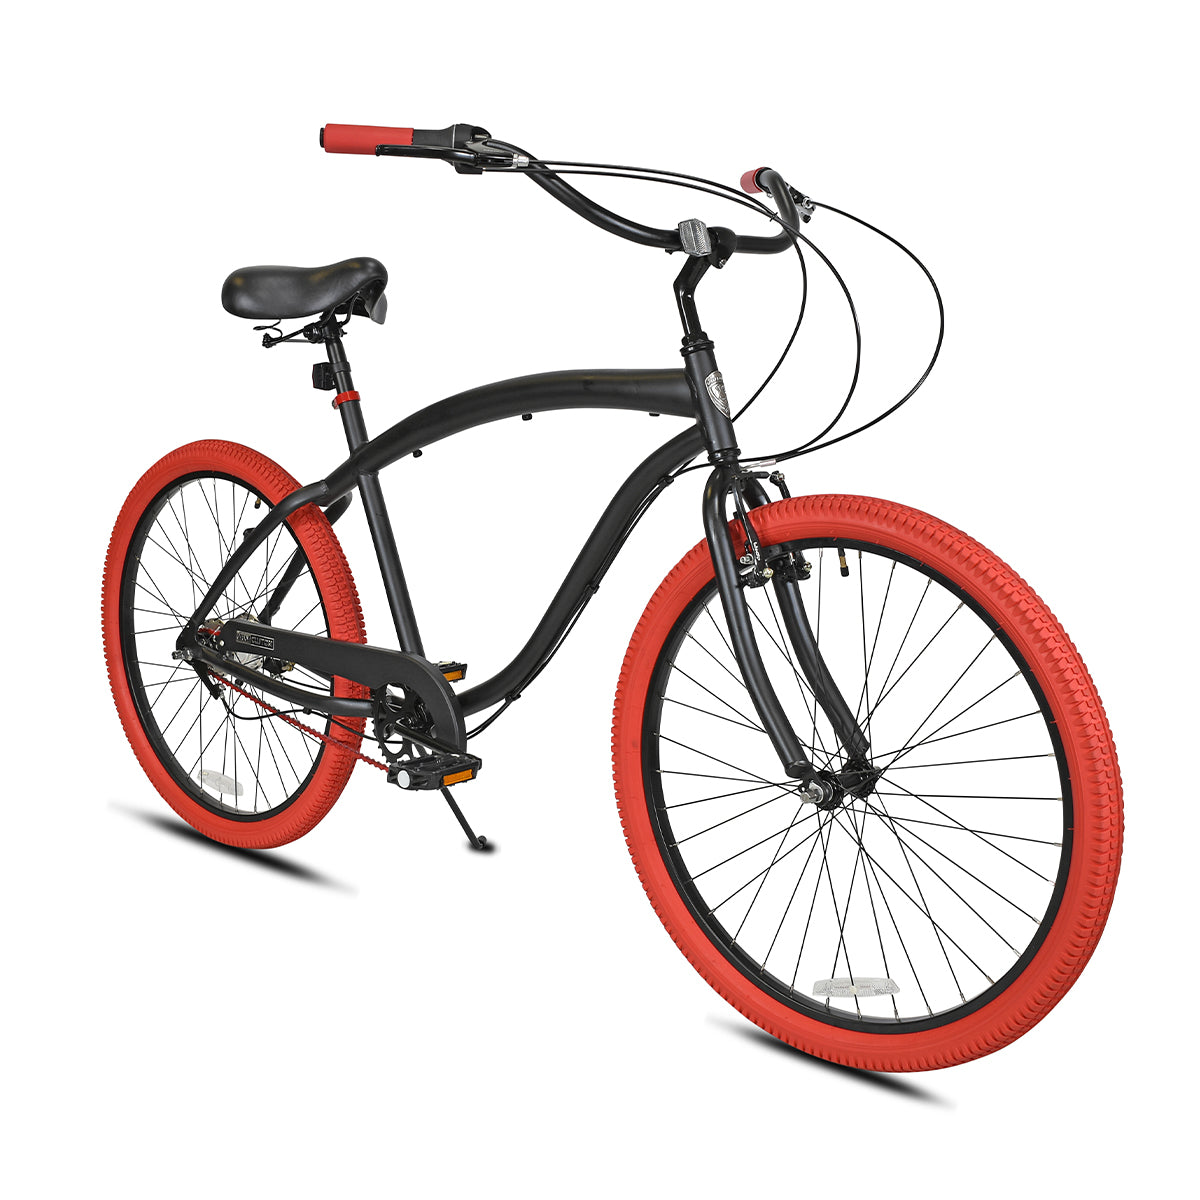 Lucas 3-Speed Cruiser Matte Black Step-Over Frame, Handlebar, Saddle, Handbrakes, Pedals, Wheels, and Shifter with Red Grips, Chain, and Tires